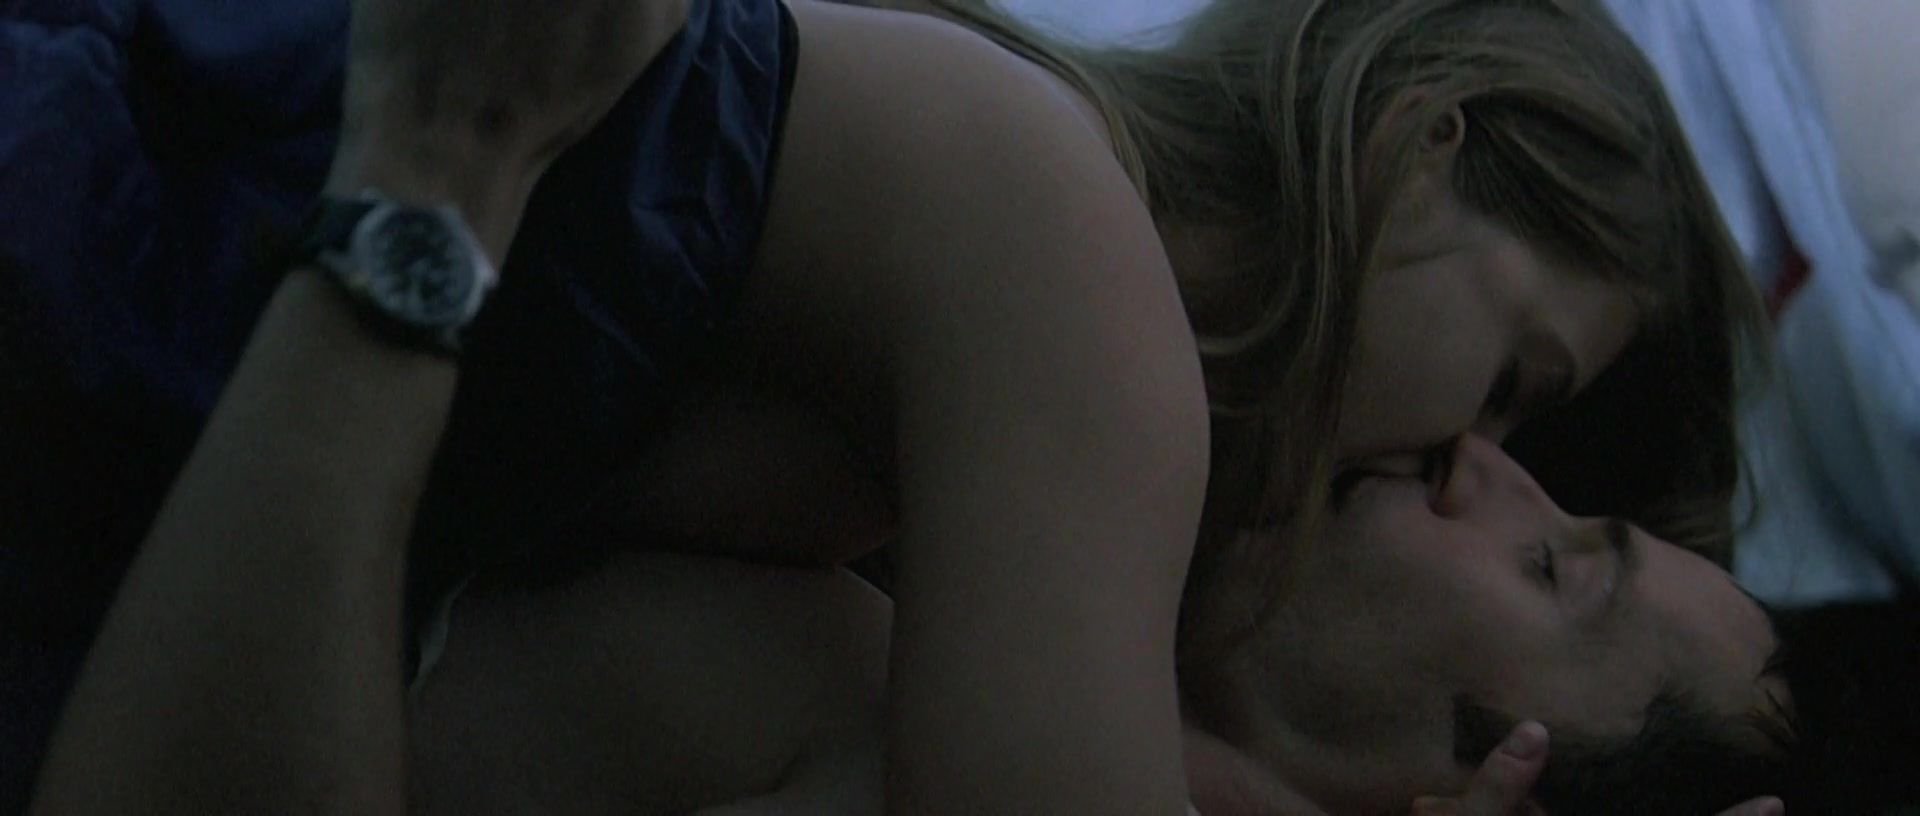 Girls Fucking Naked Melanie Laurent from French movie "Je vais bien, ne t'en fais pas" | Released in 2006 Toy - 2